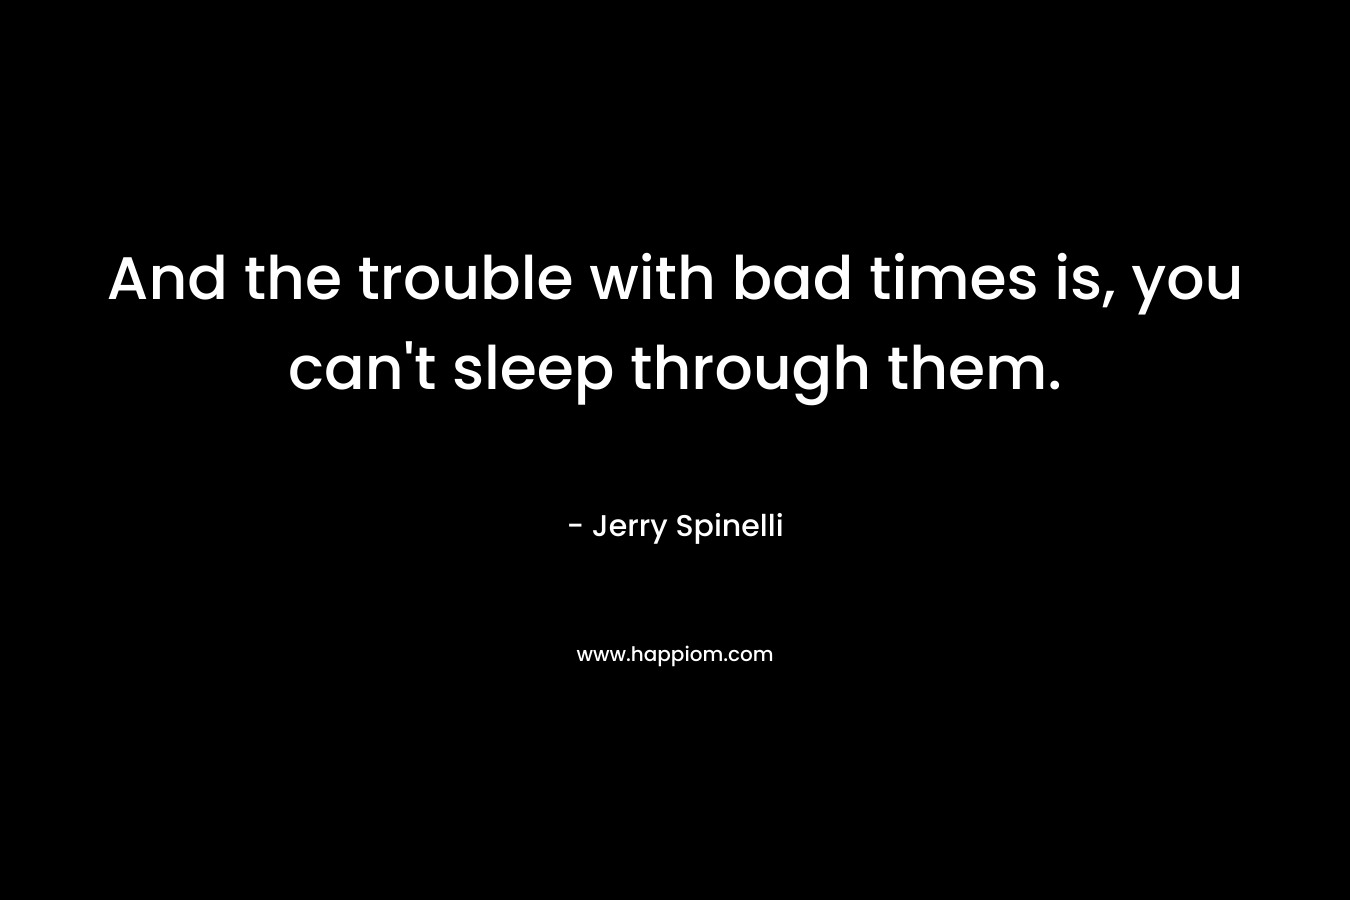 And the trouble with bad times is, you can't sleep through them.